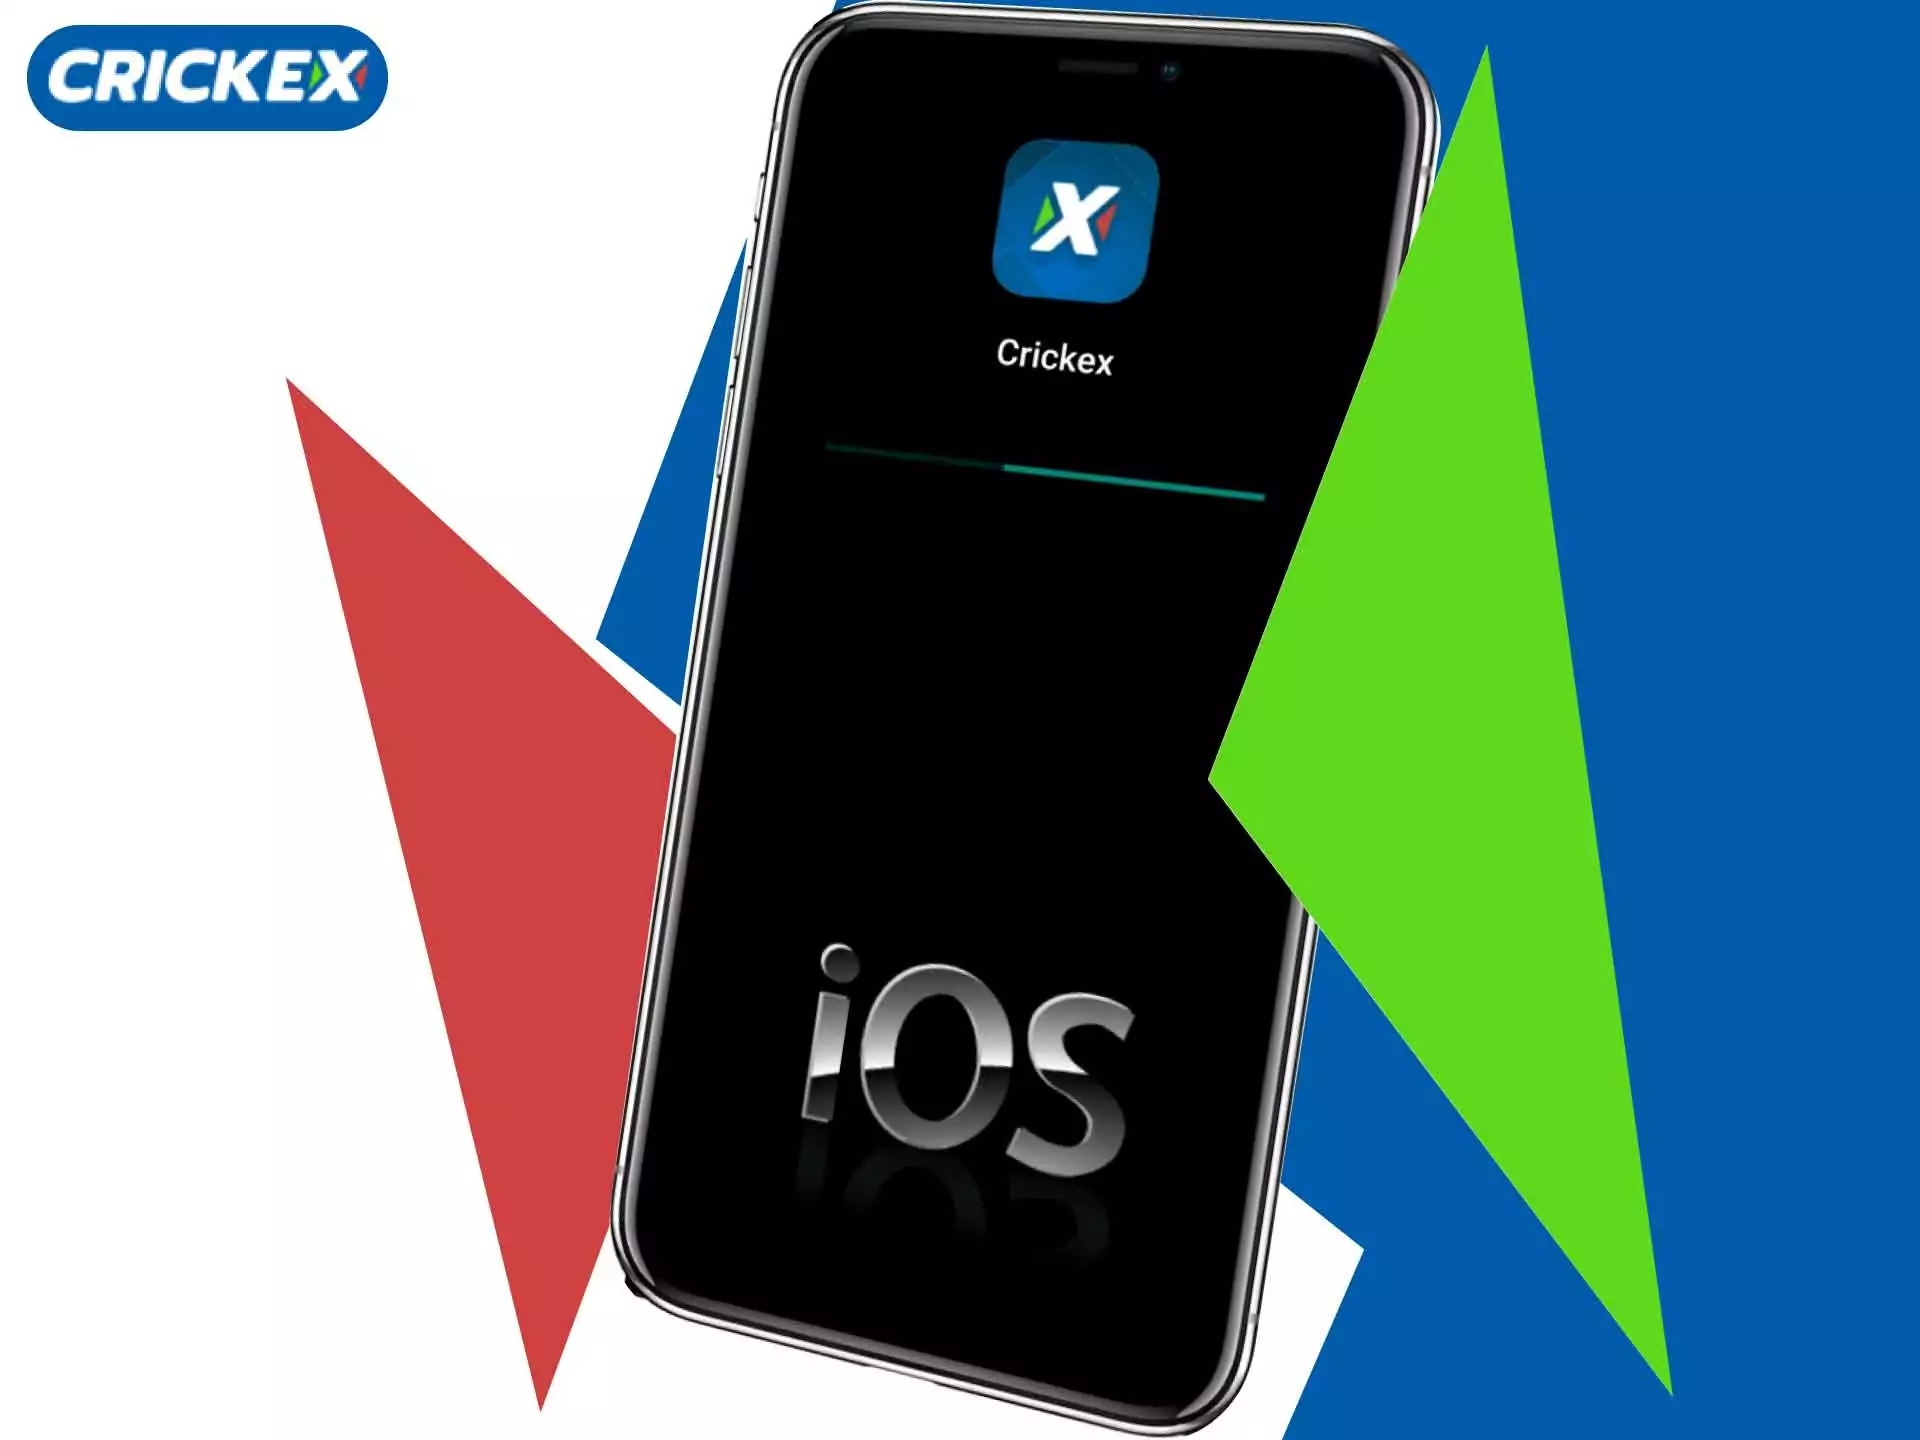 Download the Crickex app on your iPhone.